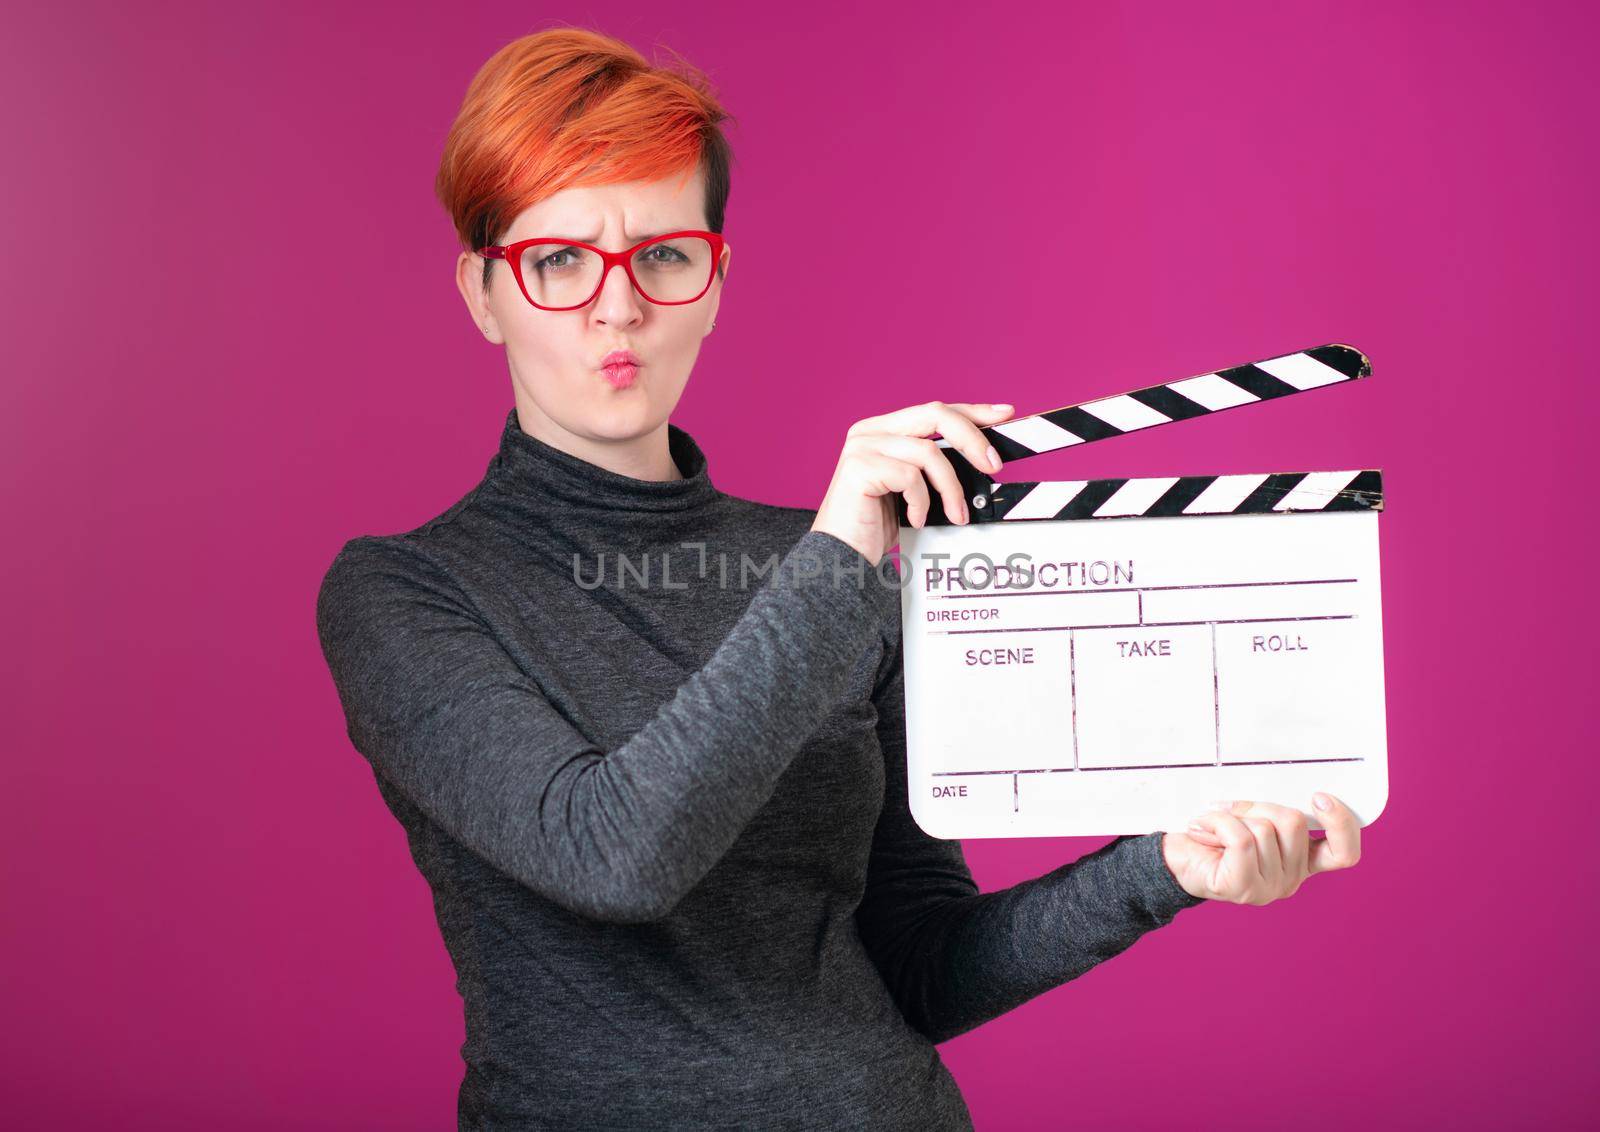 redhead woman holding movie  clapper on pink background by dotshock